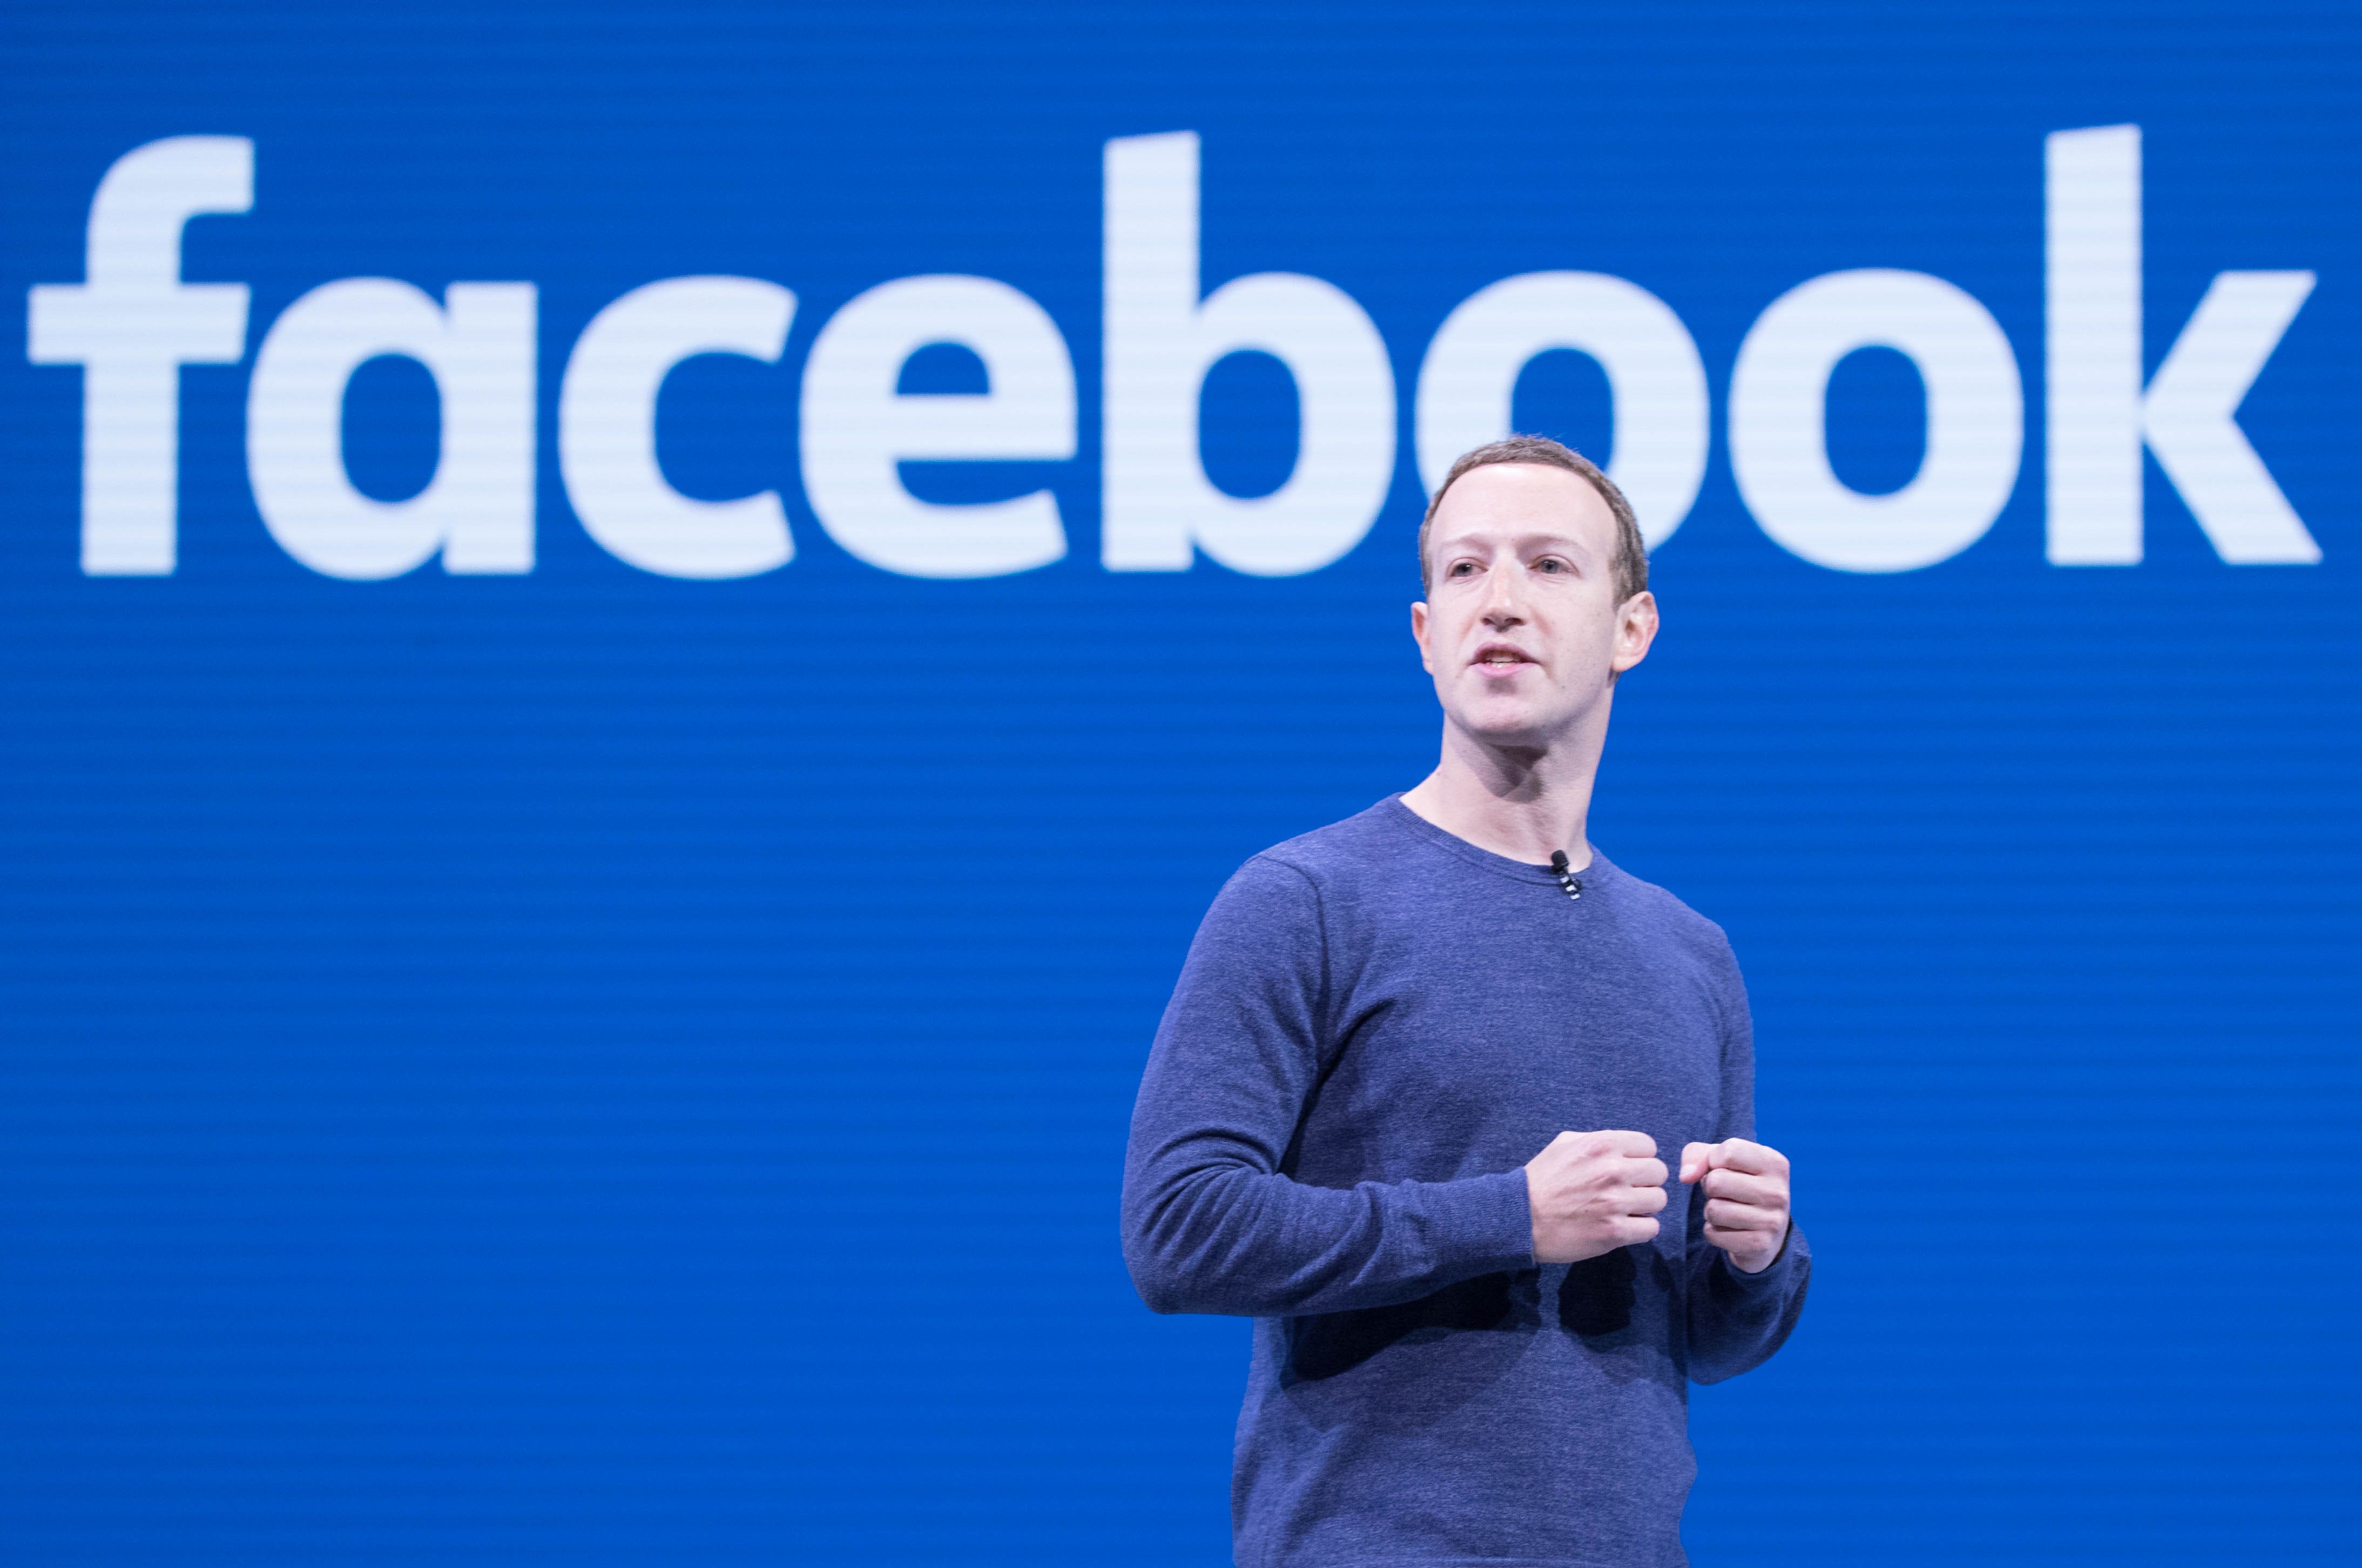 Facebook Appears To Migrate Investments From News To Better Compete With TikTok